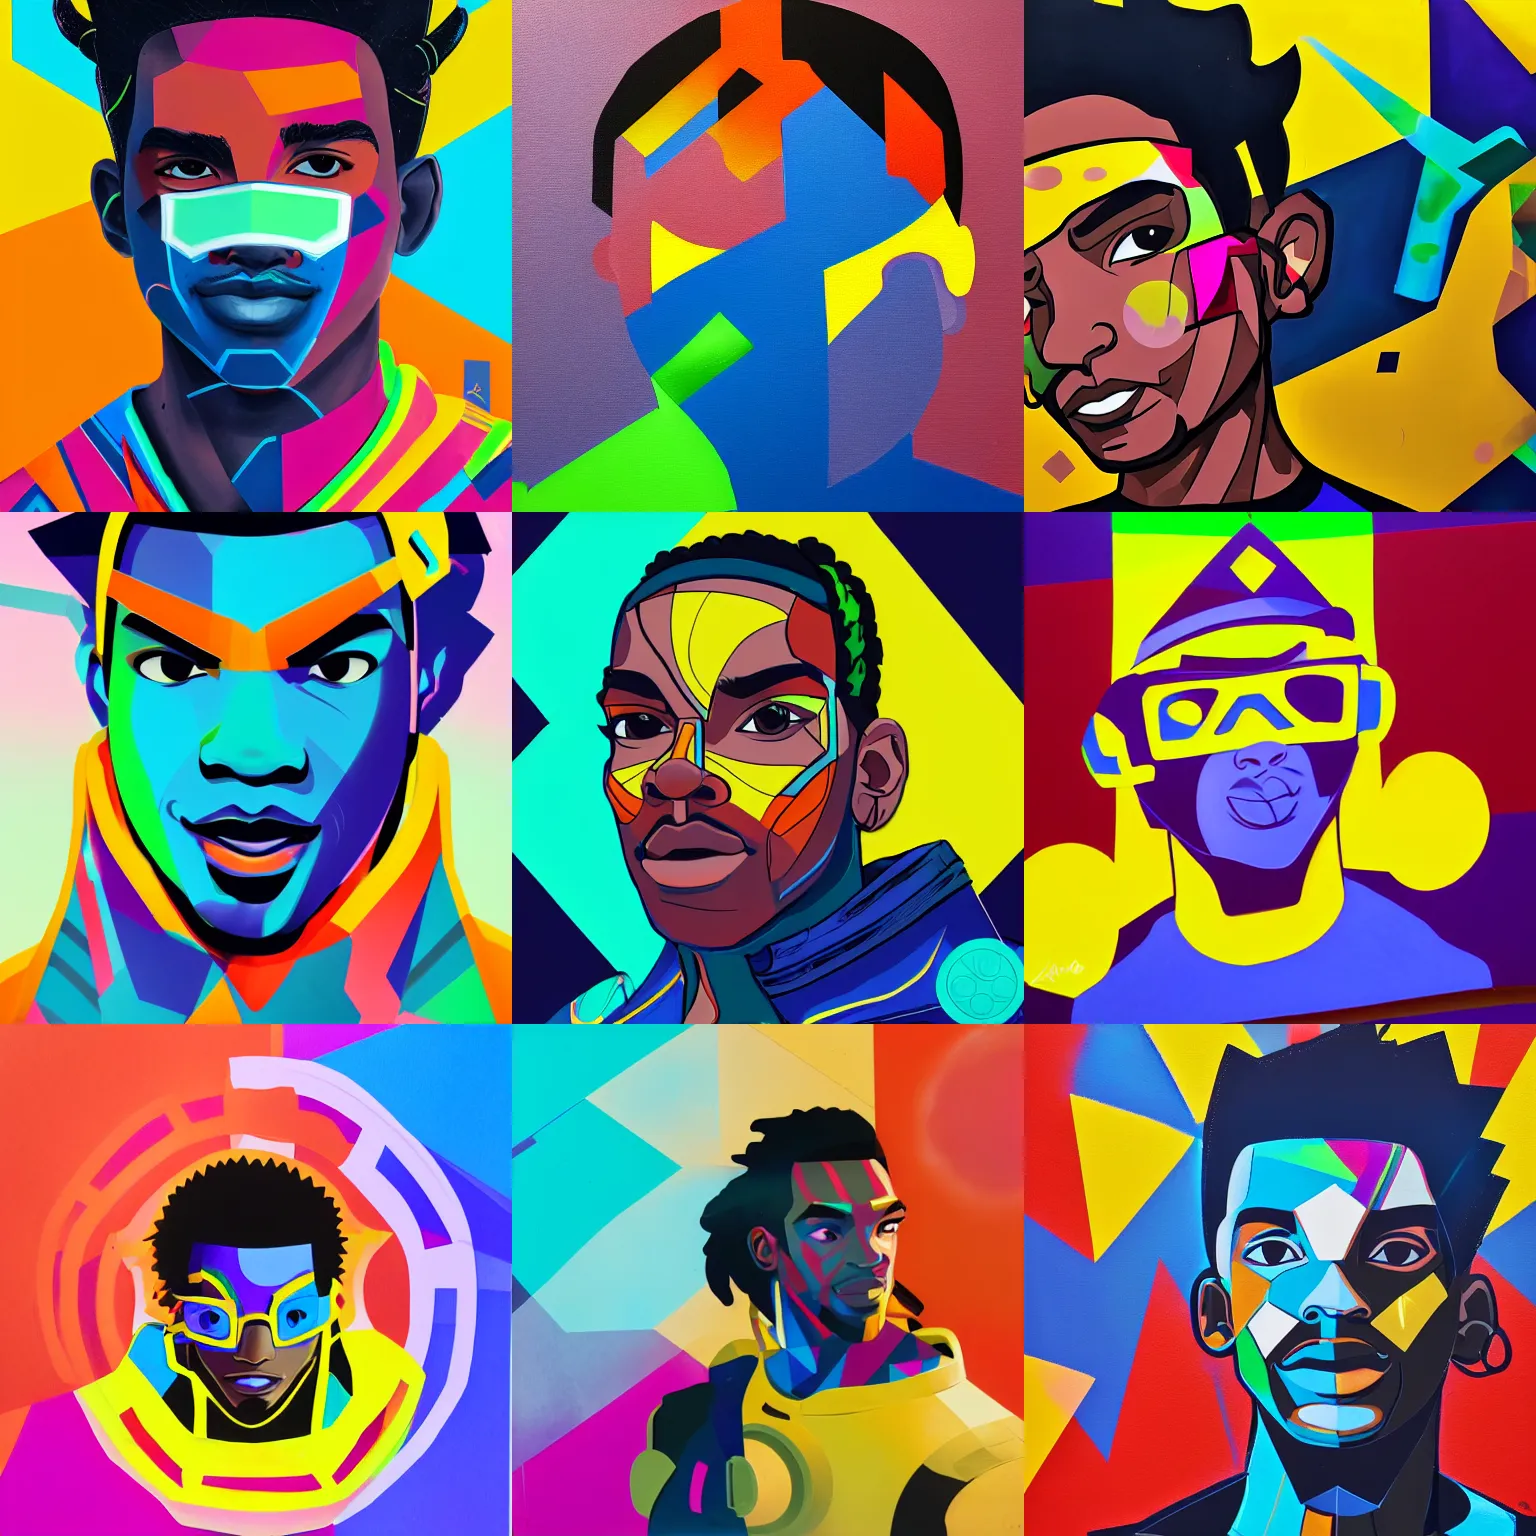 Prompt: A portrait of Lúcio from Overwatch, geometric shapes, vibrant colors, spray paint, rounded corners